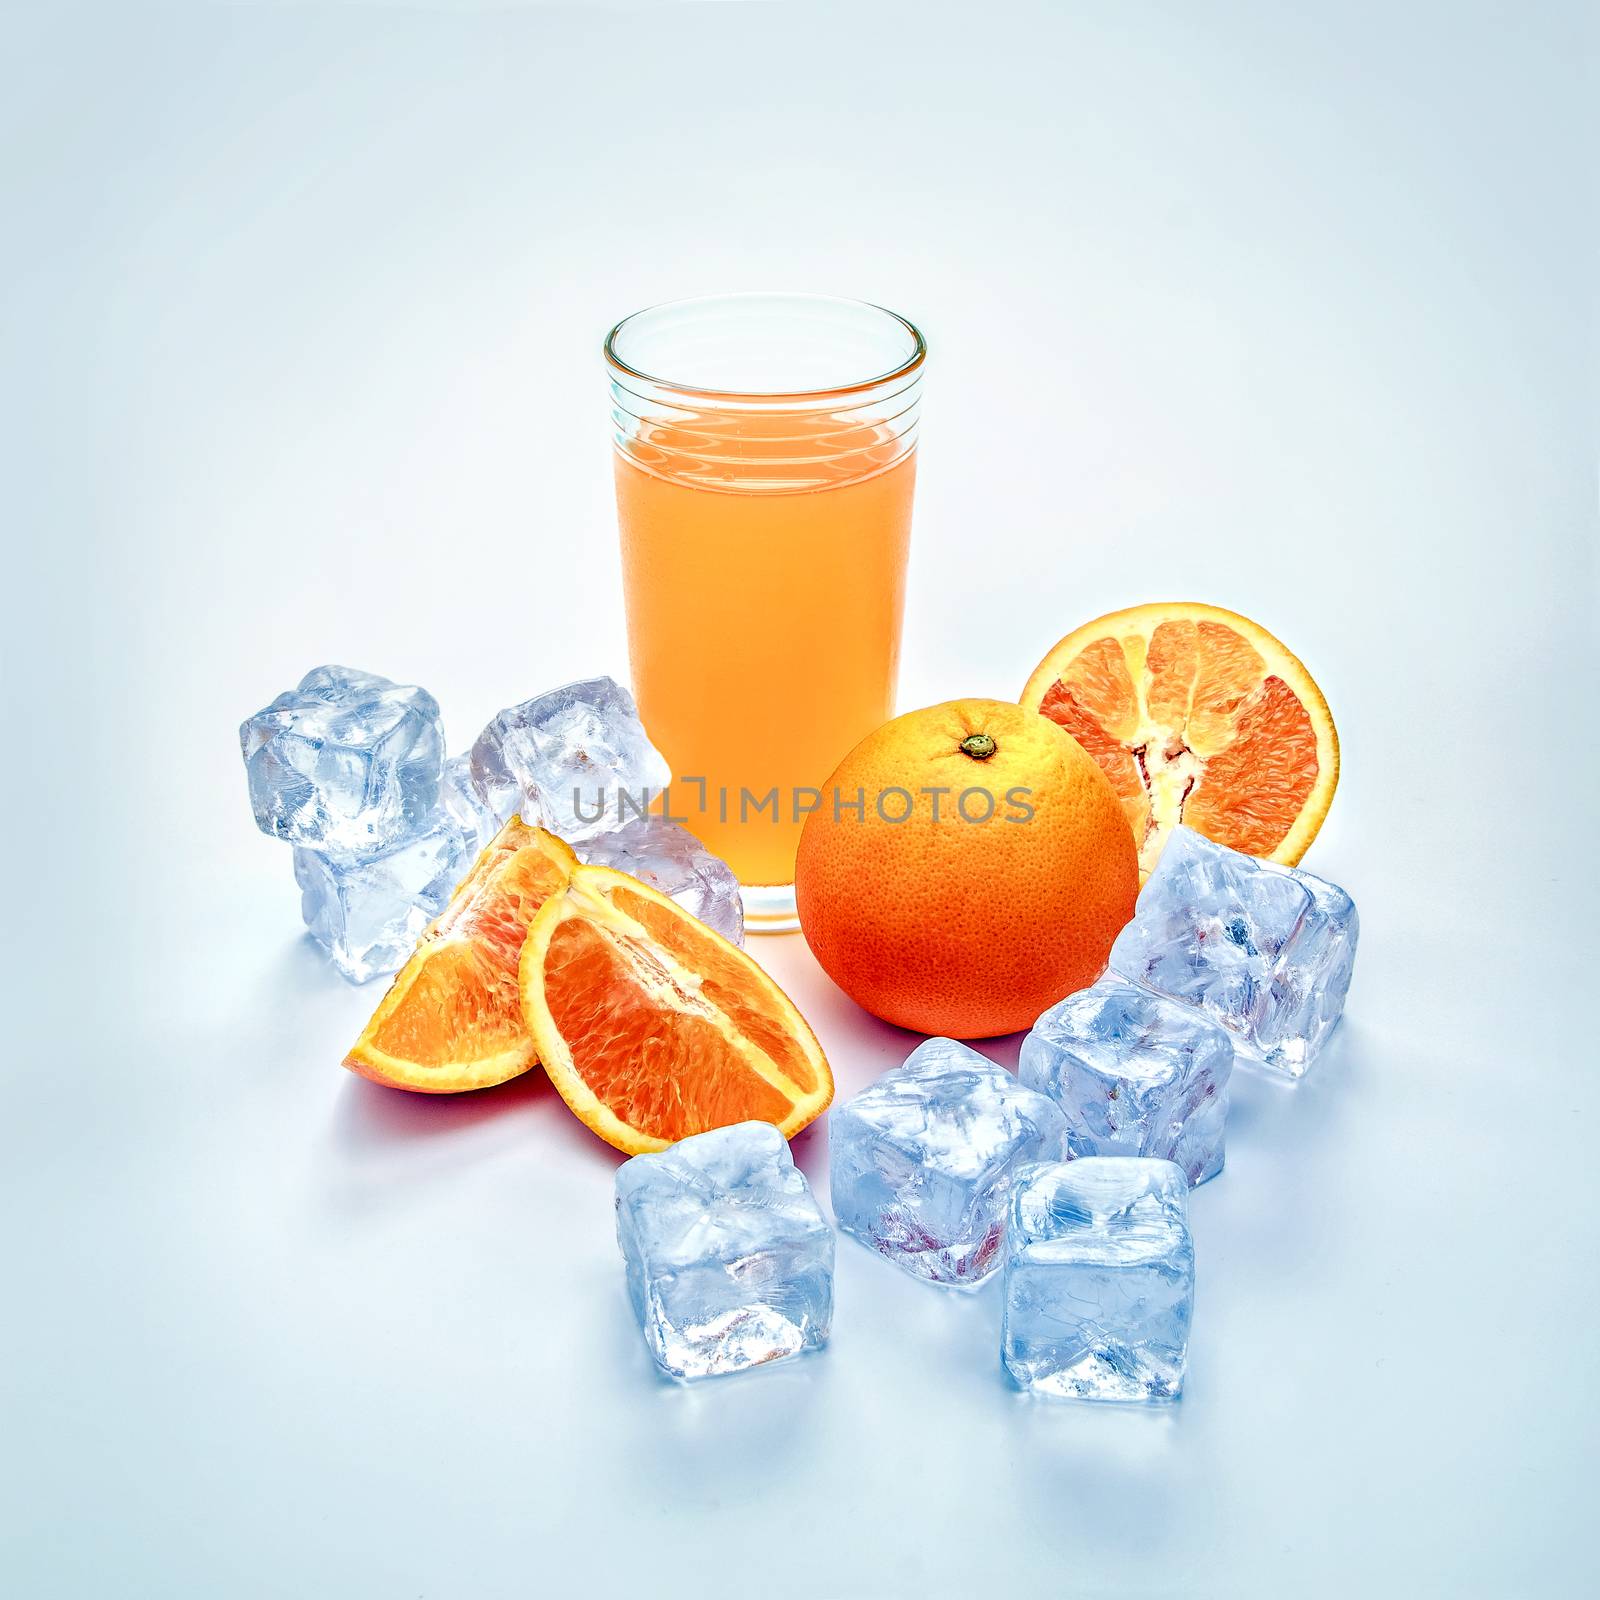 Glass of cool orange juice, ice and orange slices in he composition